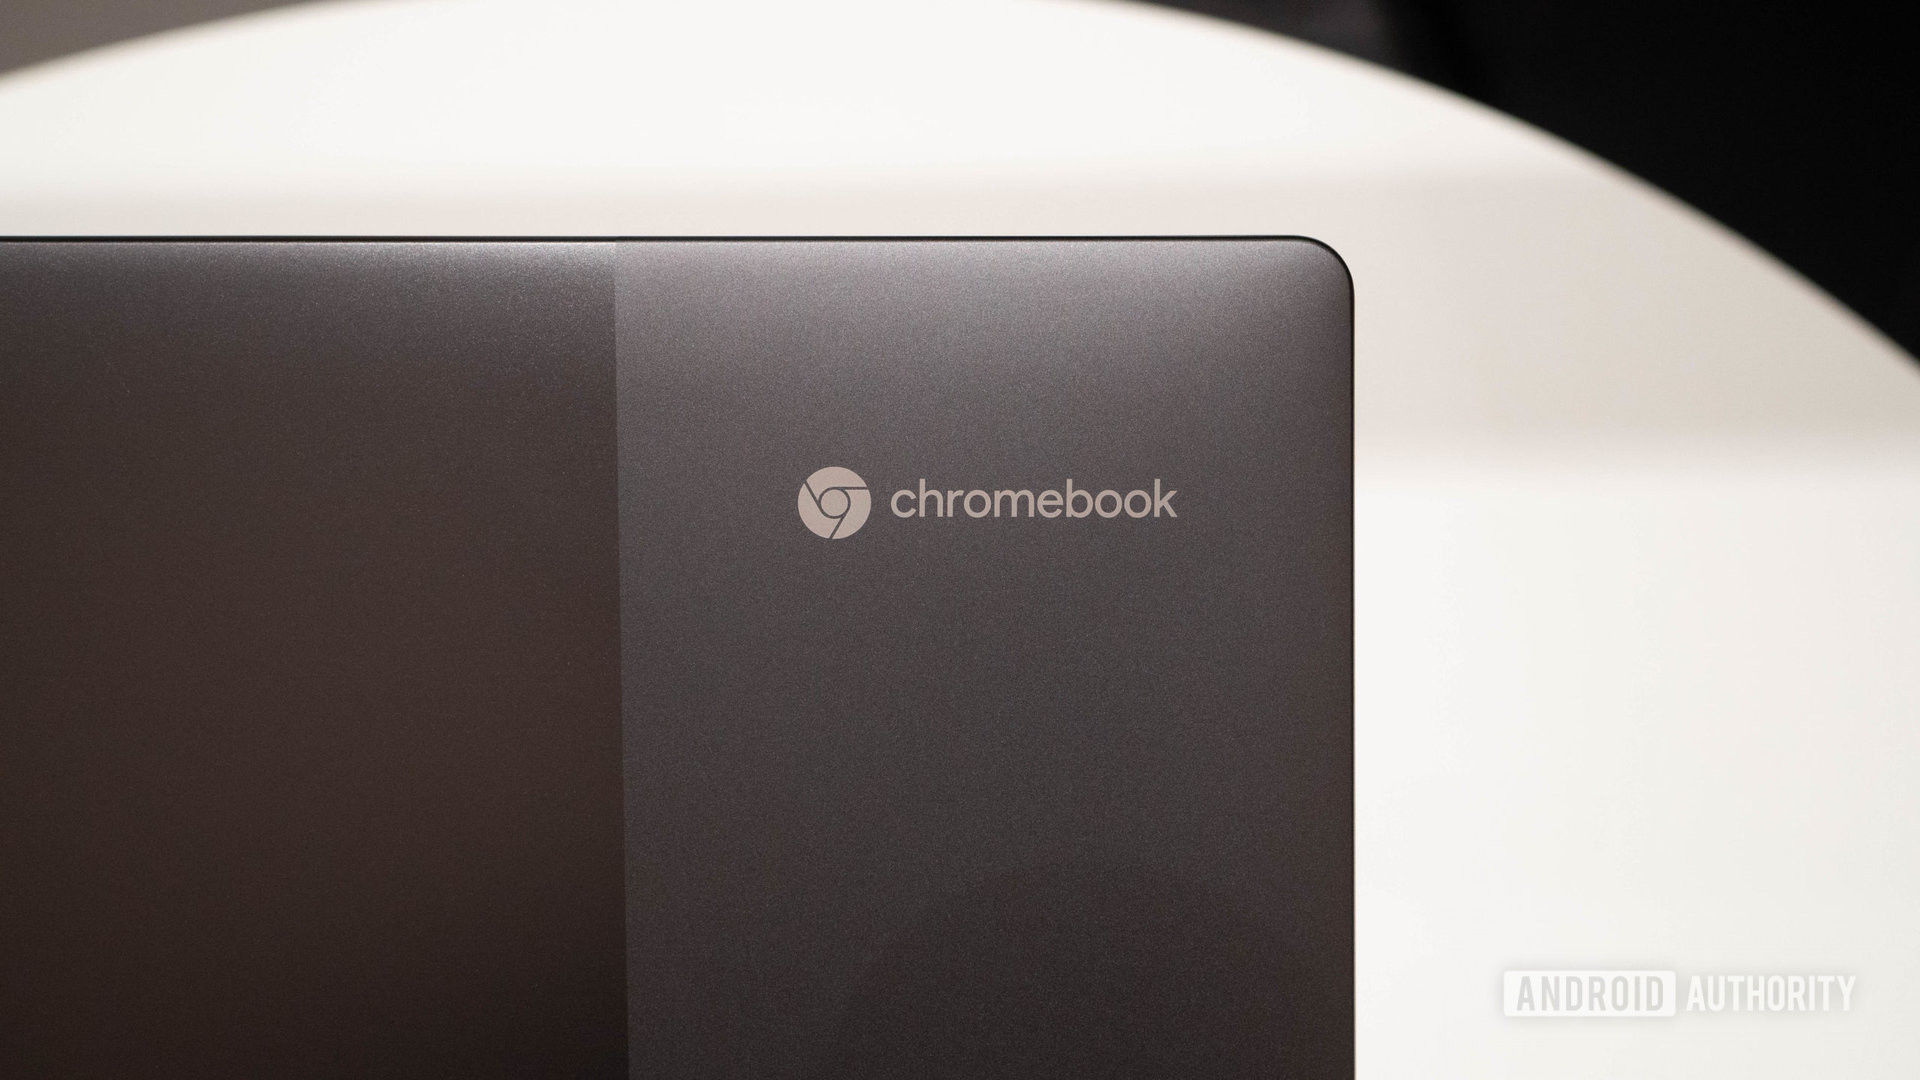 We asked, you told us: Chrome OS has plenty of regular users